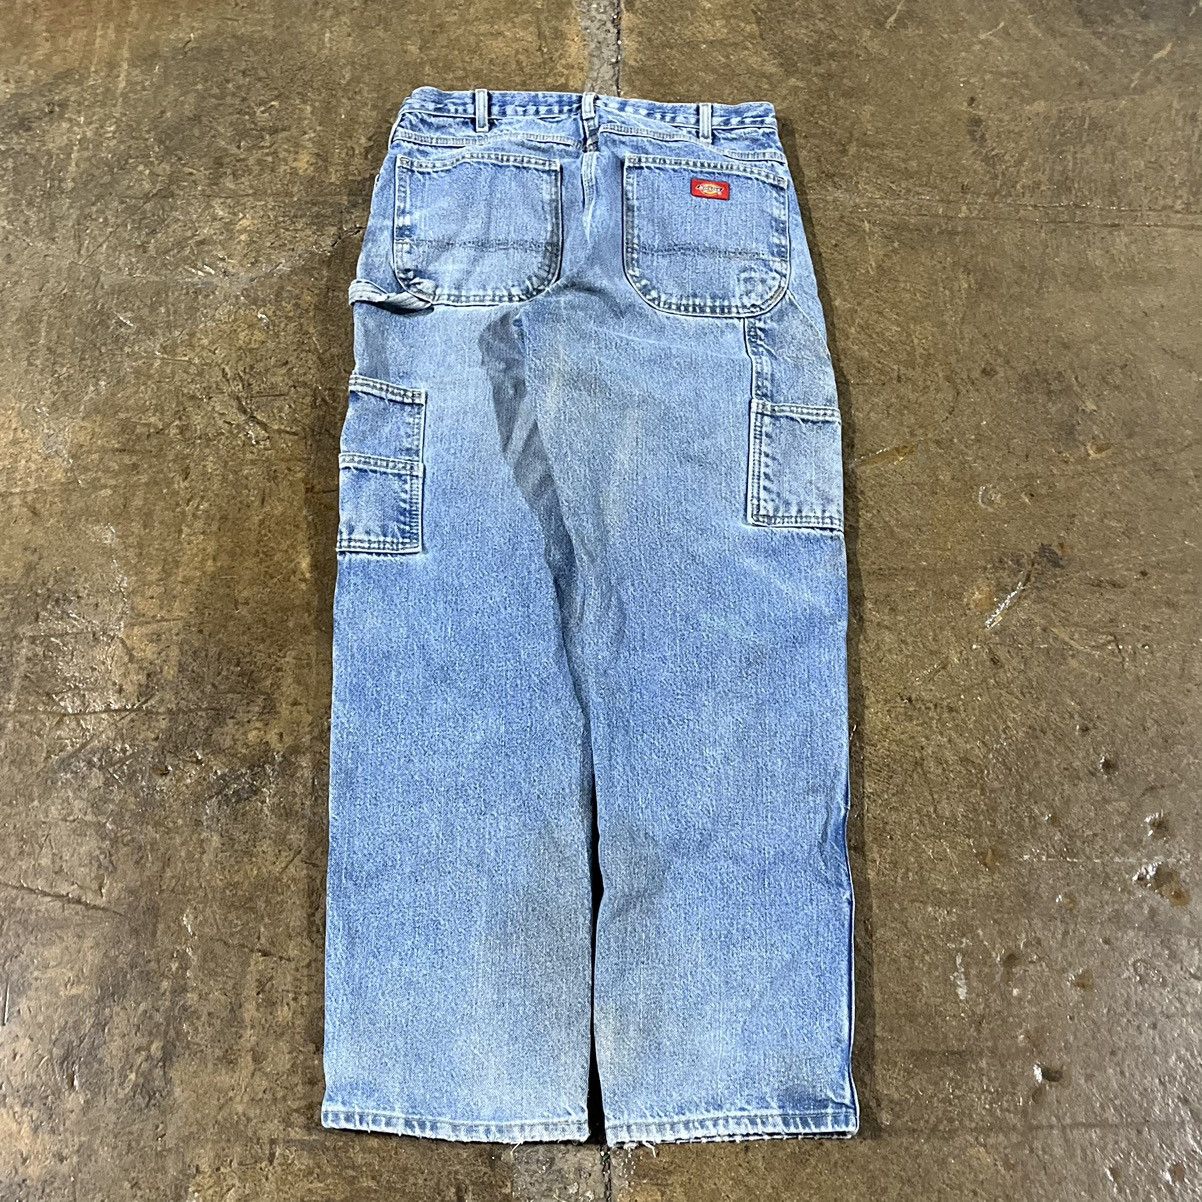 Vintage Crazy Dickies Double Knee Carpenter Jeans Workwear Skater Size US 34 / EU 50 - 1 Preview